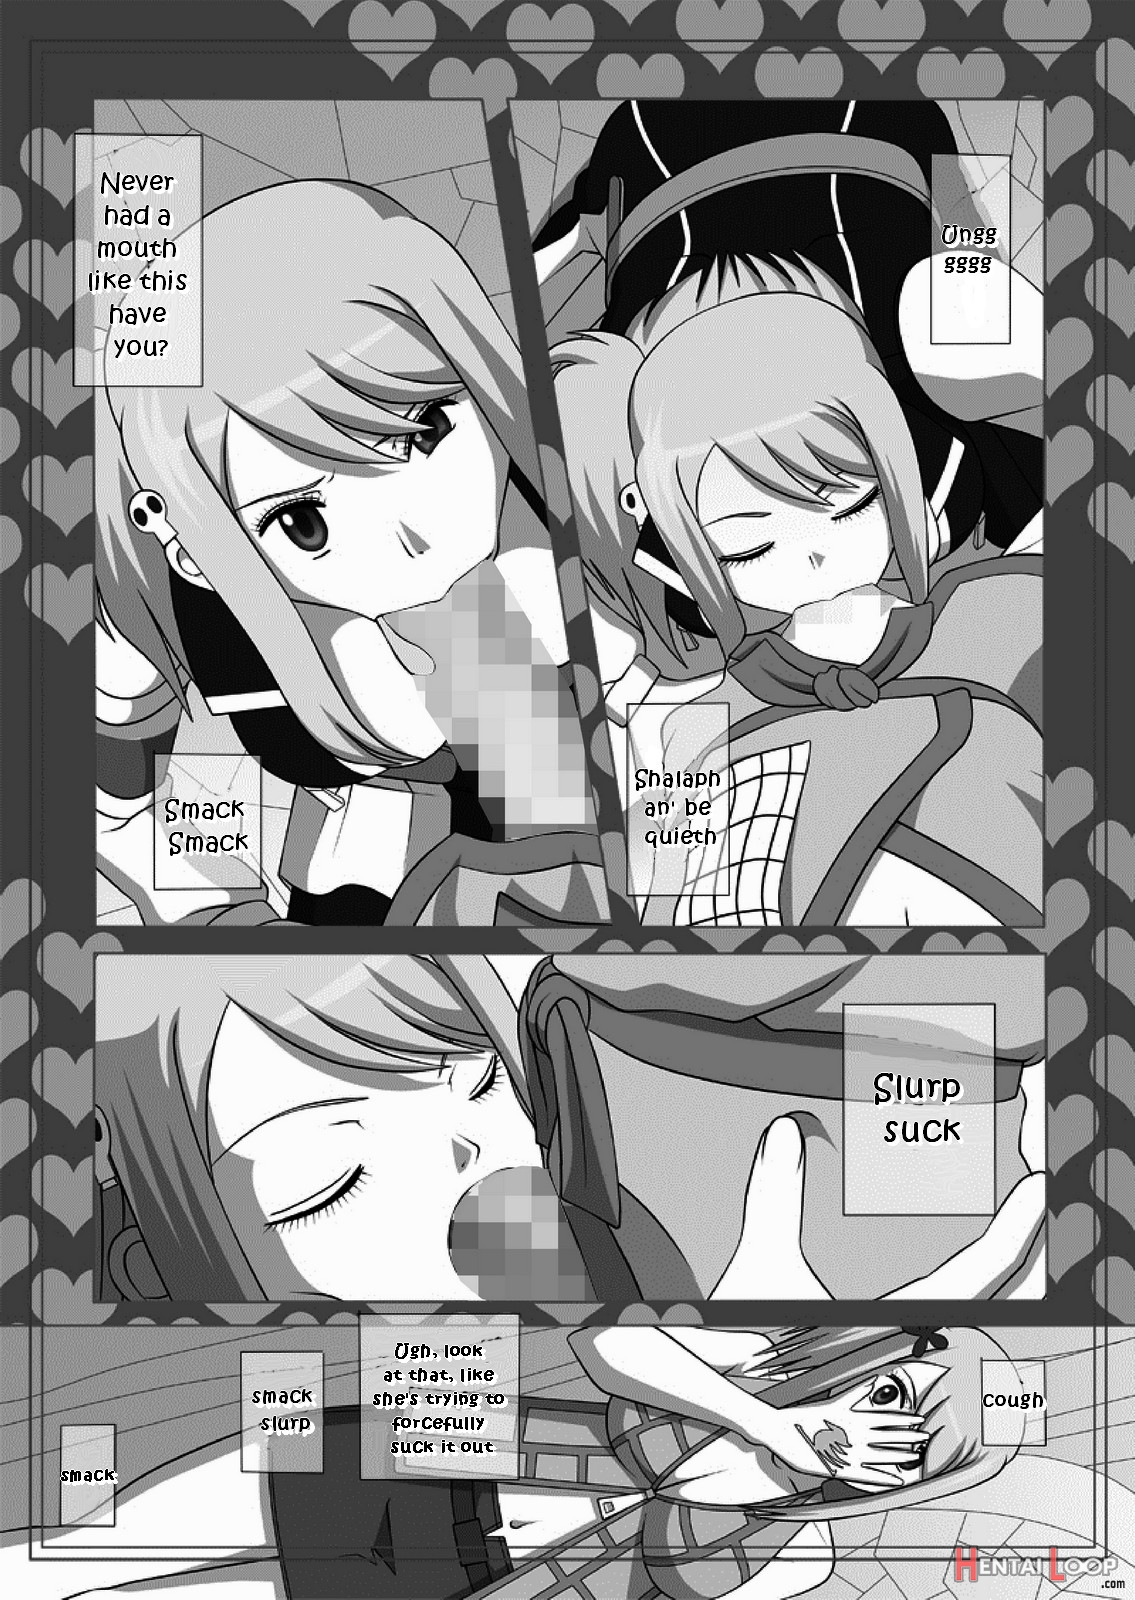 Okuchi No Ehon Vol. 36 Sweethole -lucy Lucy- page 7